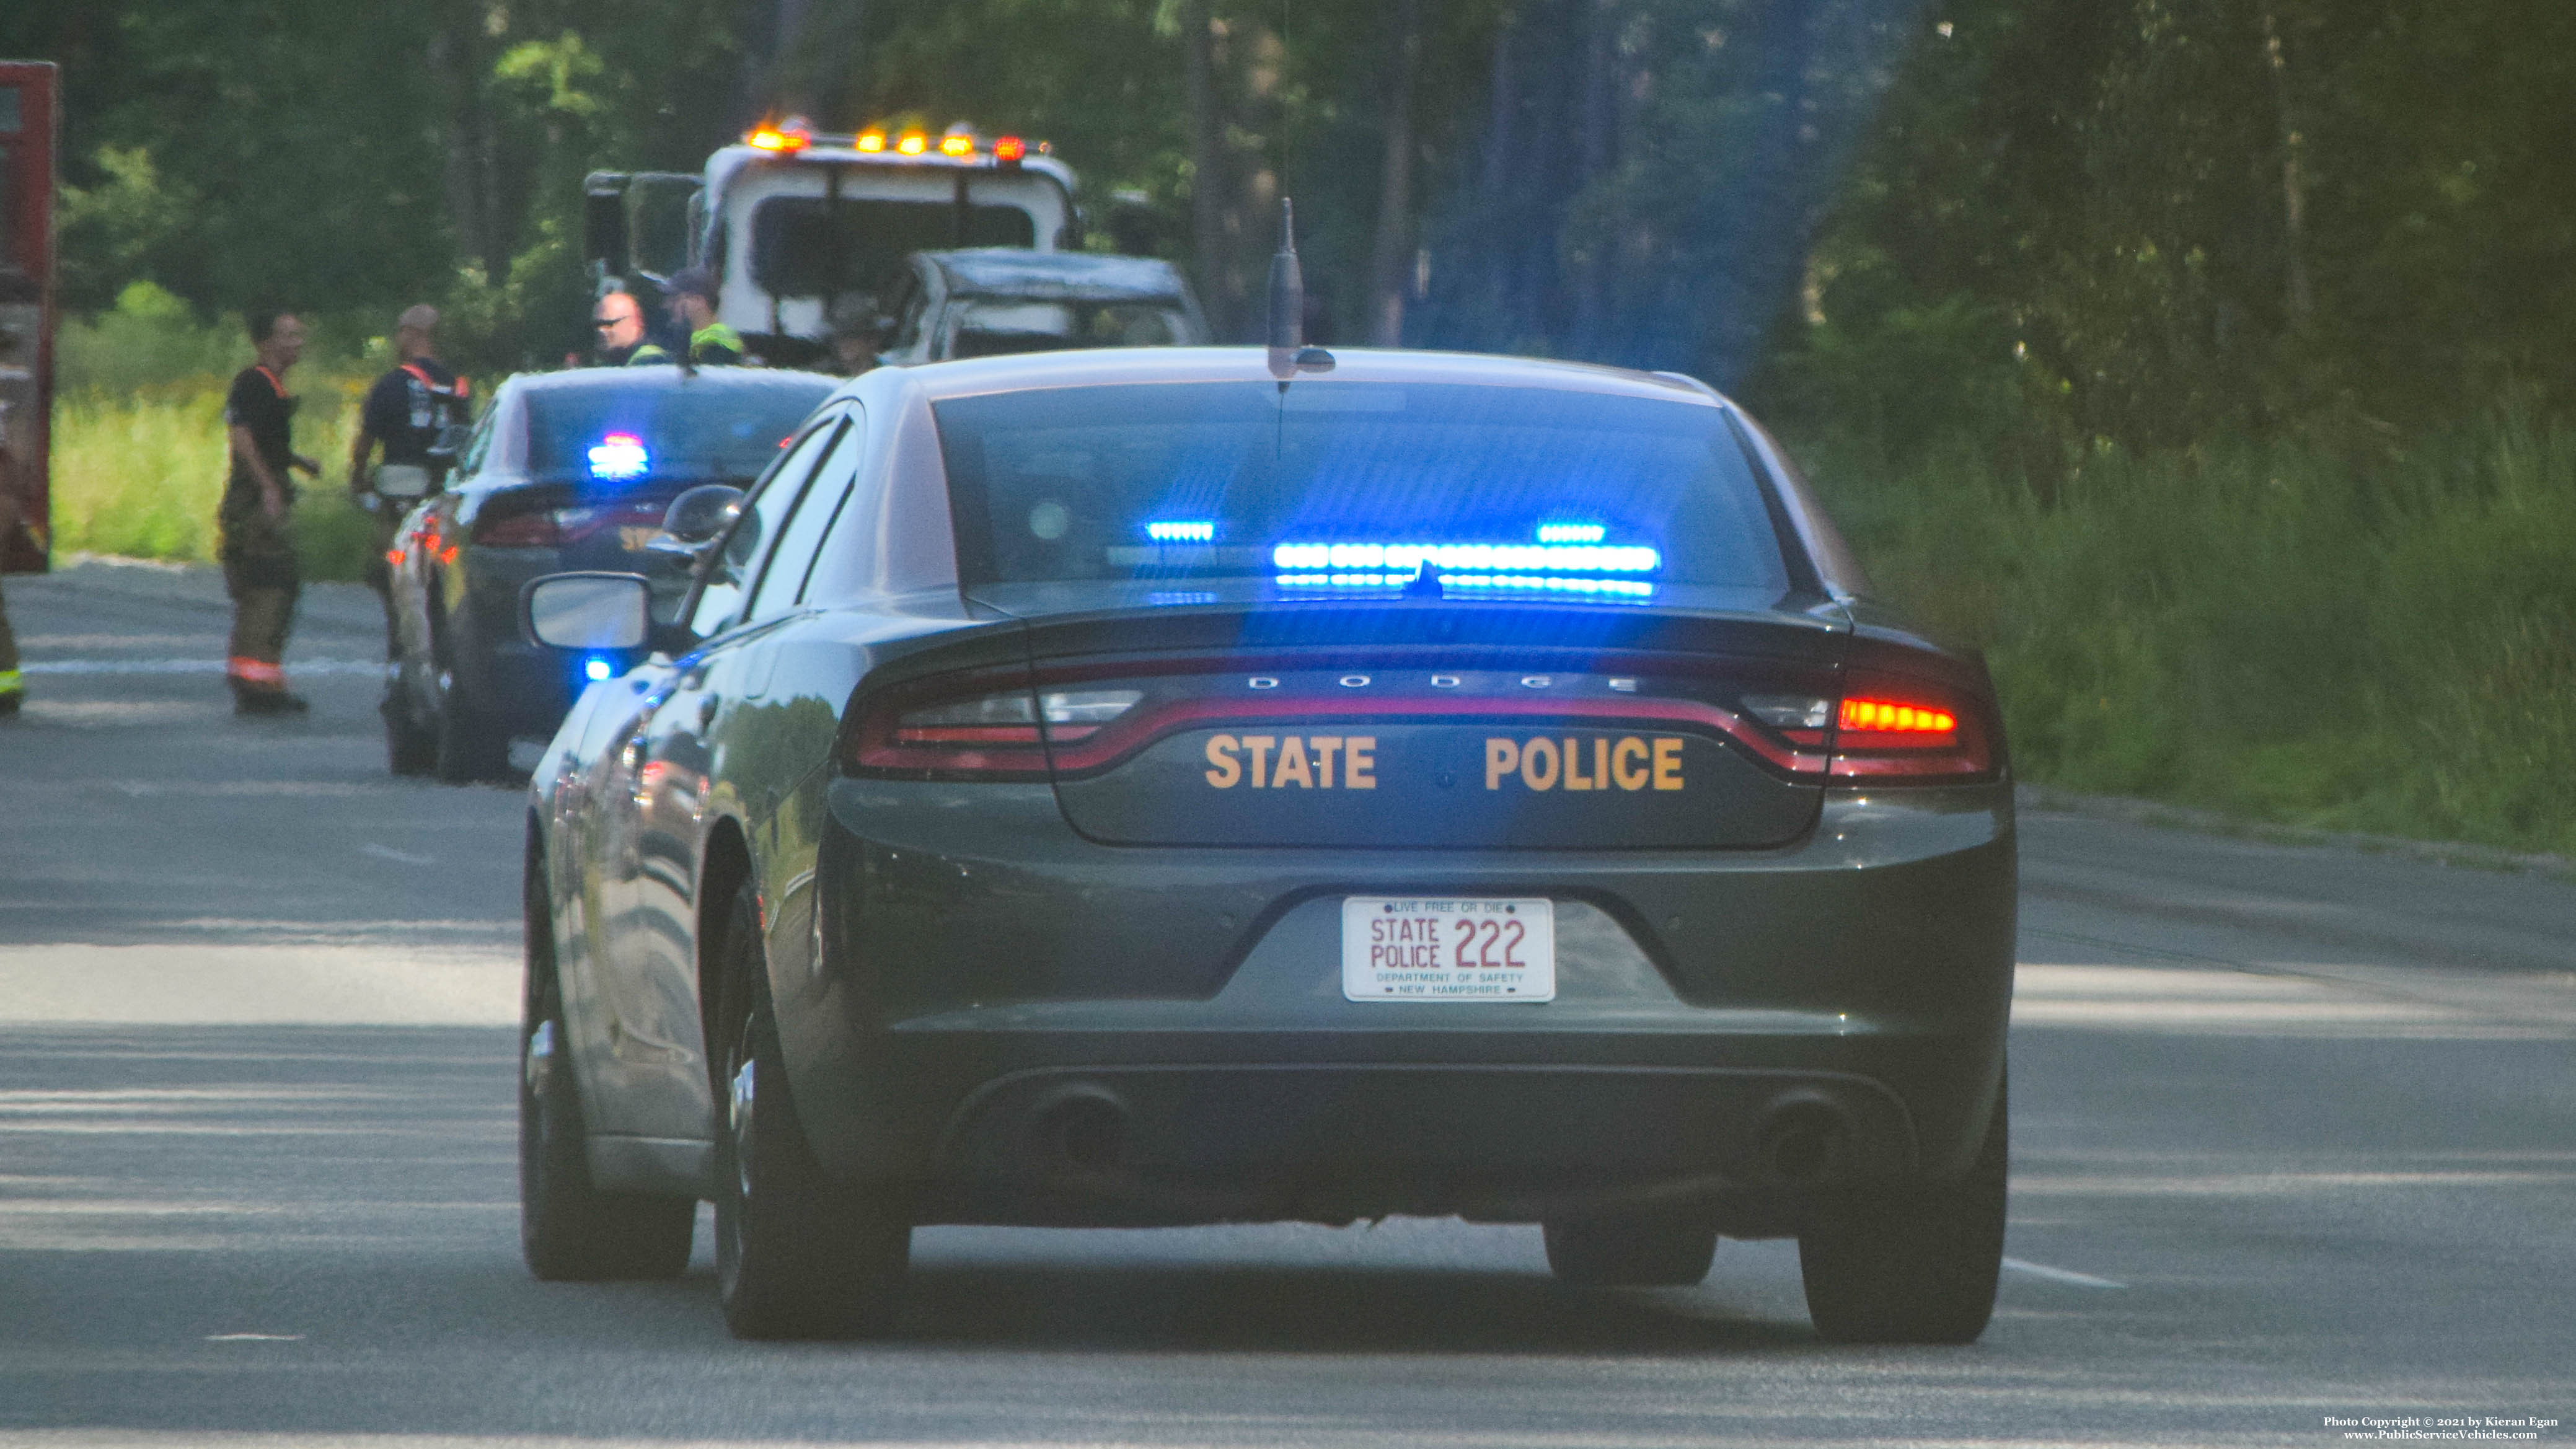 A photo  of New Hampshire State Police
            Cruiser 222, a 2017-2019 Dodge Charger             taken by Kieran Egan